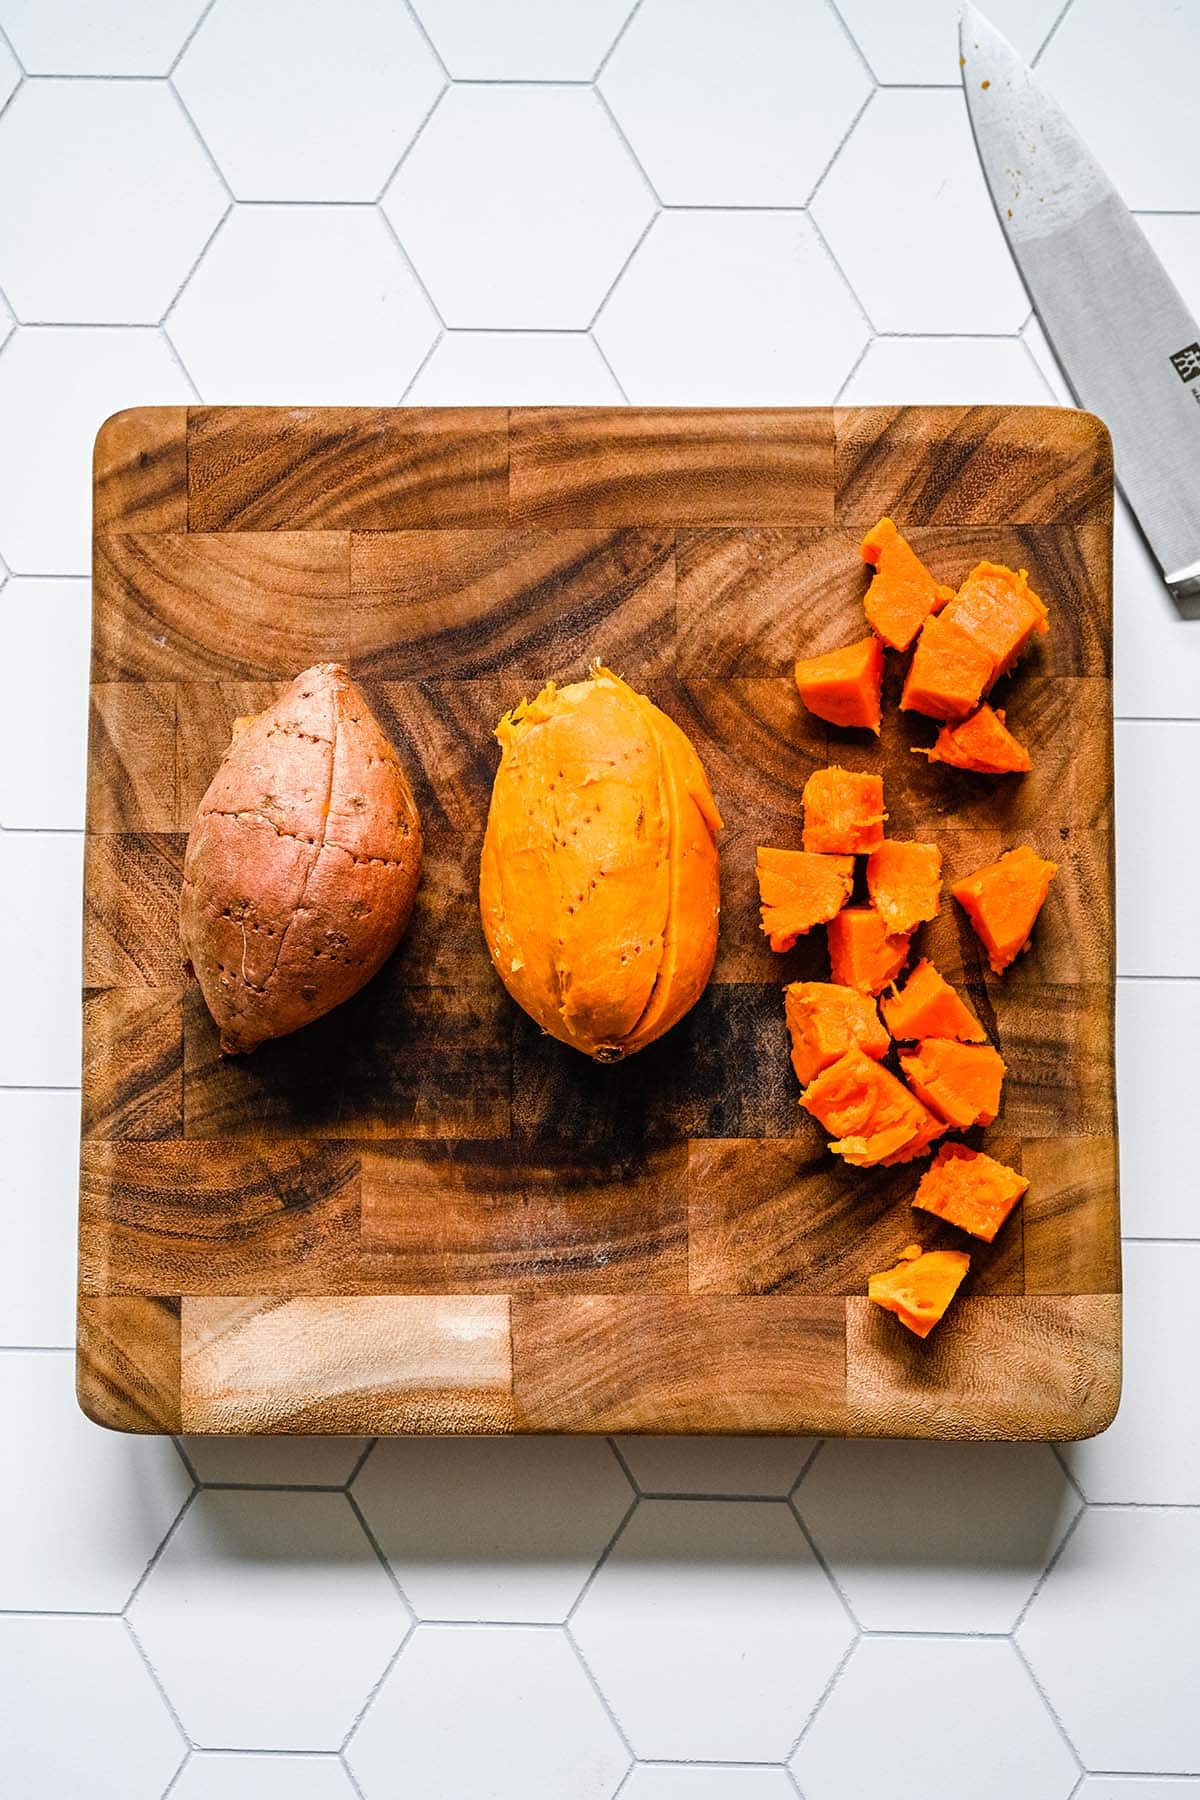 Microwaved sweet potatoes being chopped on a wooden block cutting board.